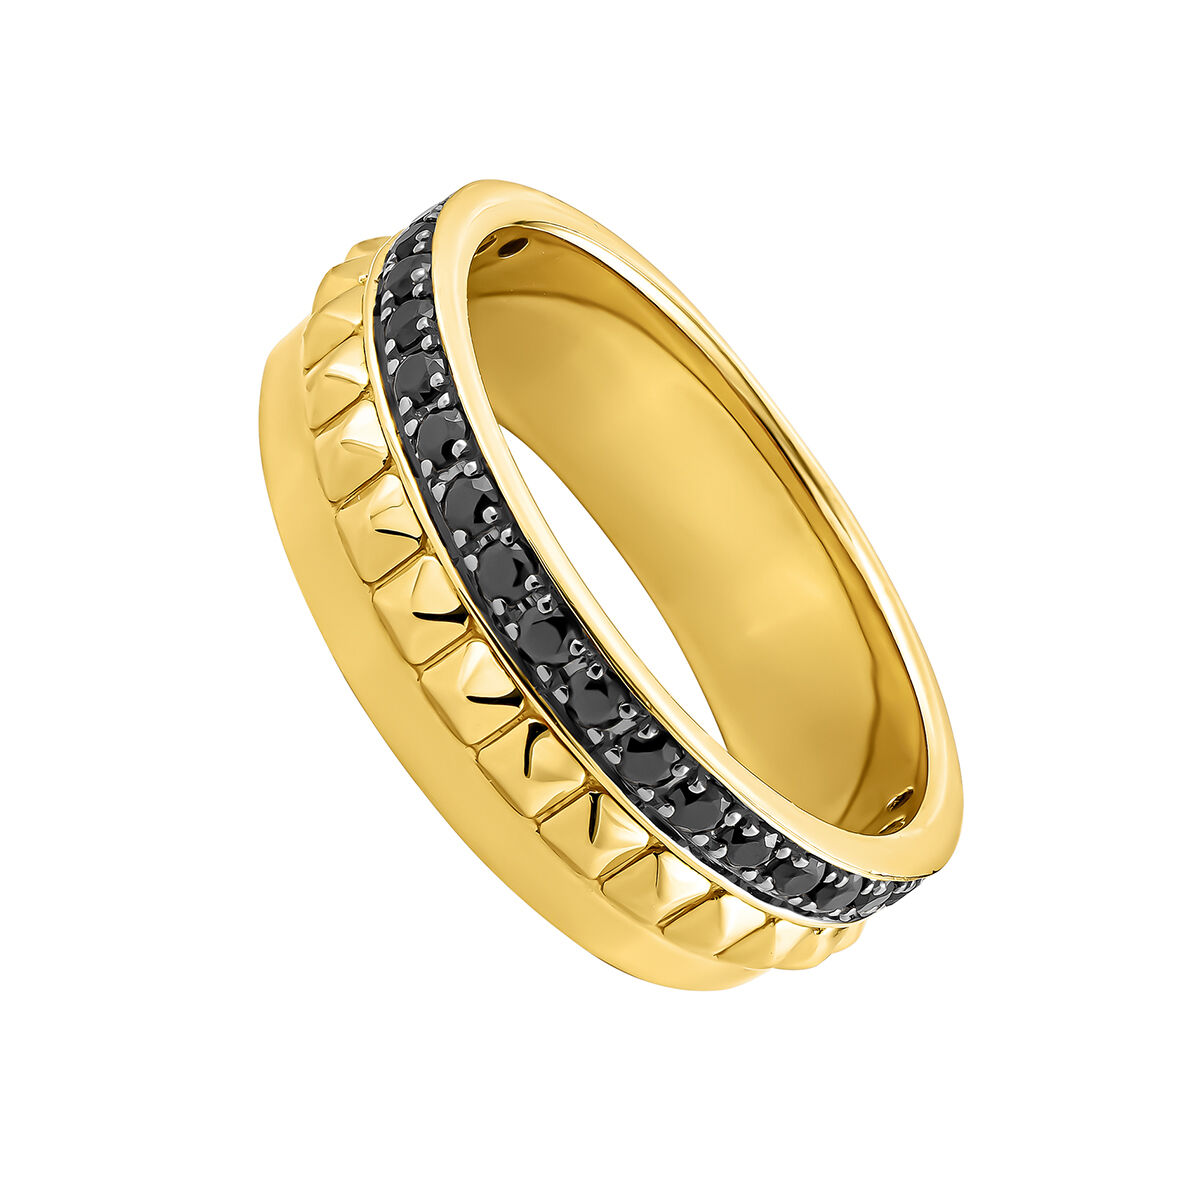 Ring in 18k yellow gold-plated silver with raised detail and black spinel gemstones , J04903-02-BSN, hi-res